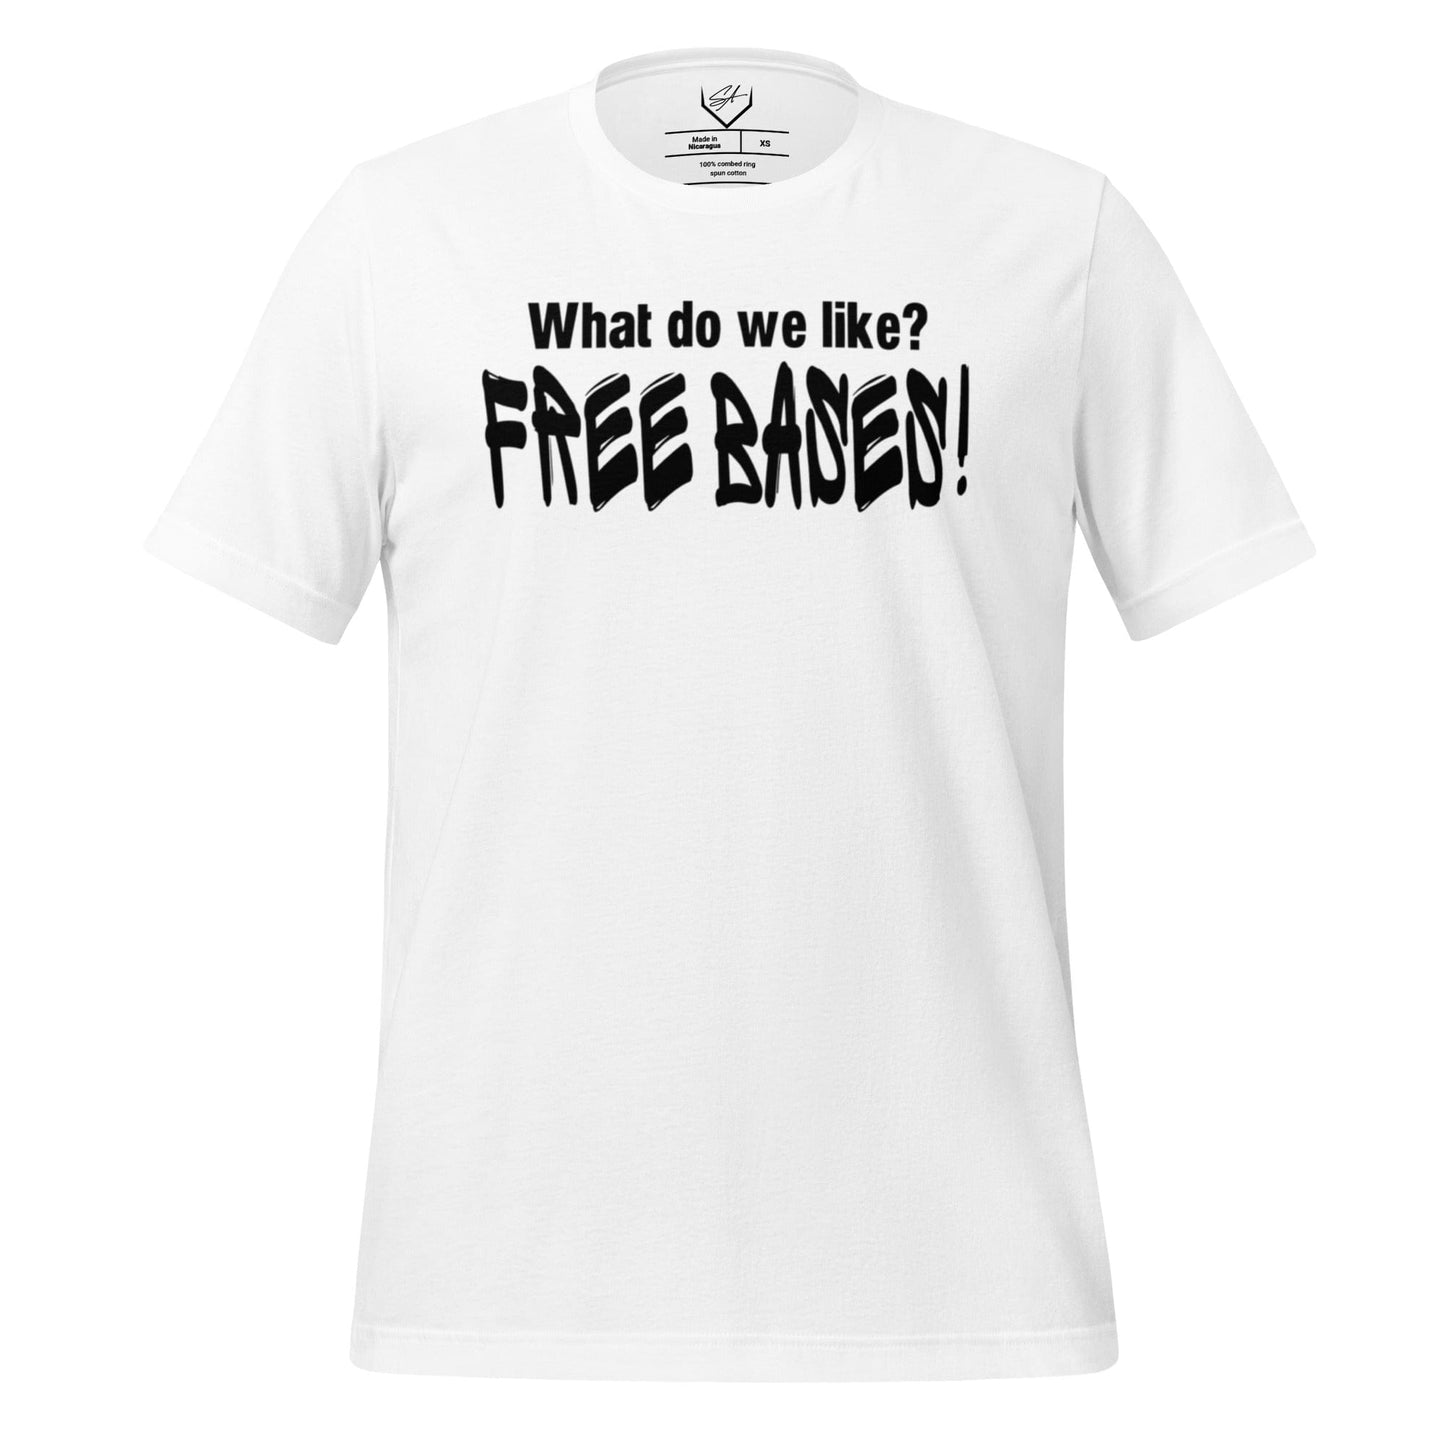 What Do We Like, Free Bases - Adult Tee